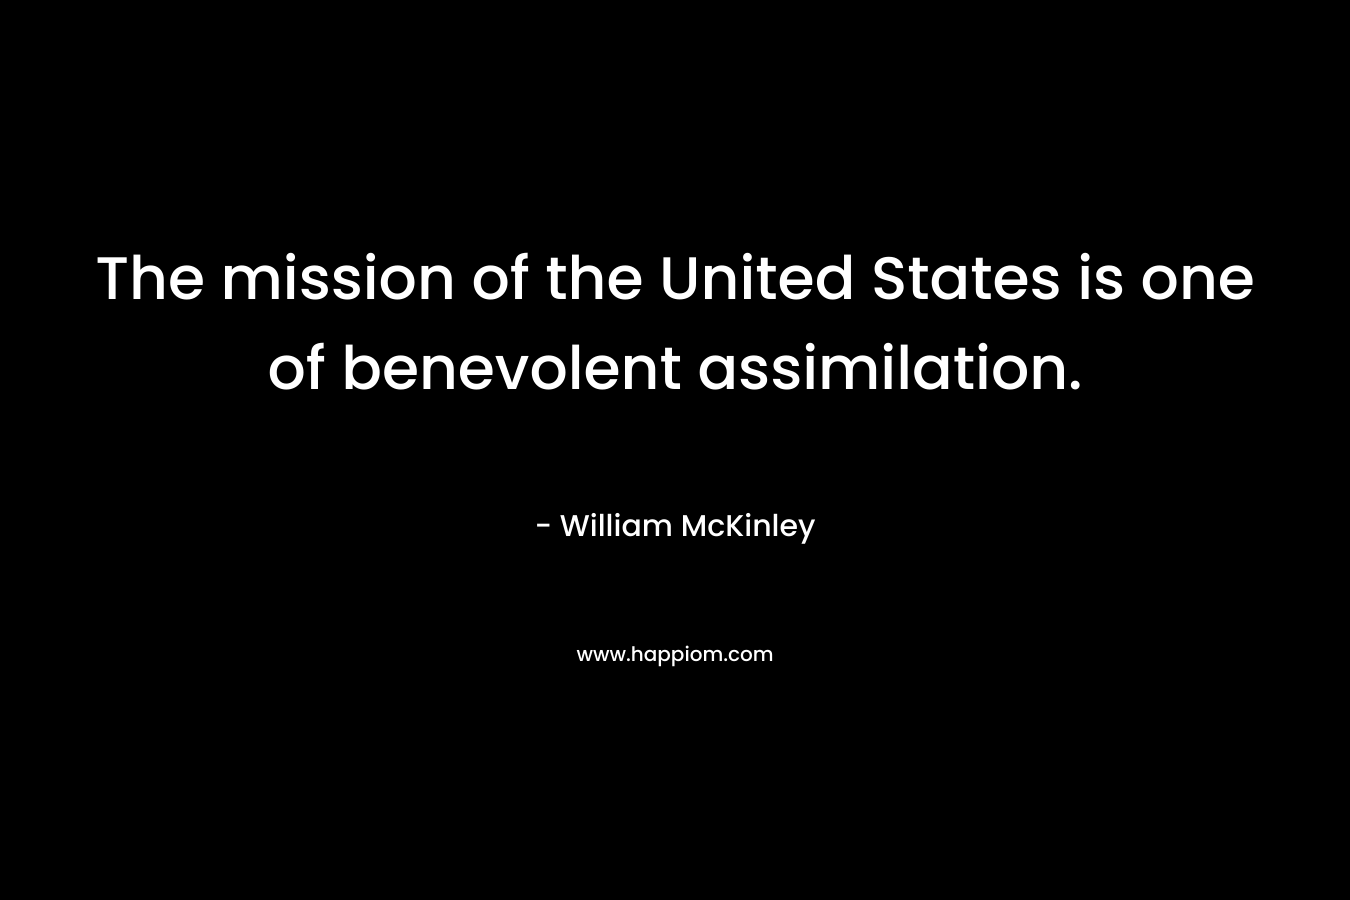 The mission of the United States is one of benevolent assimilation.